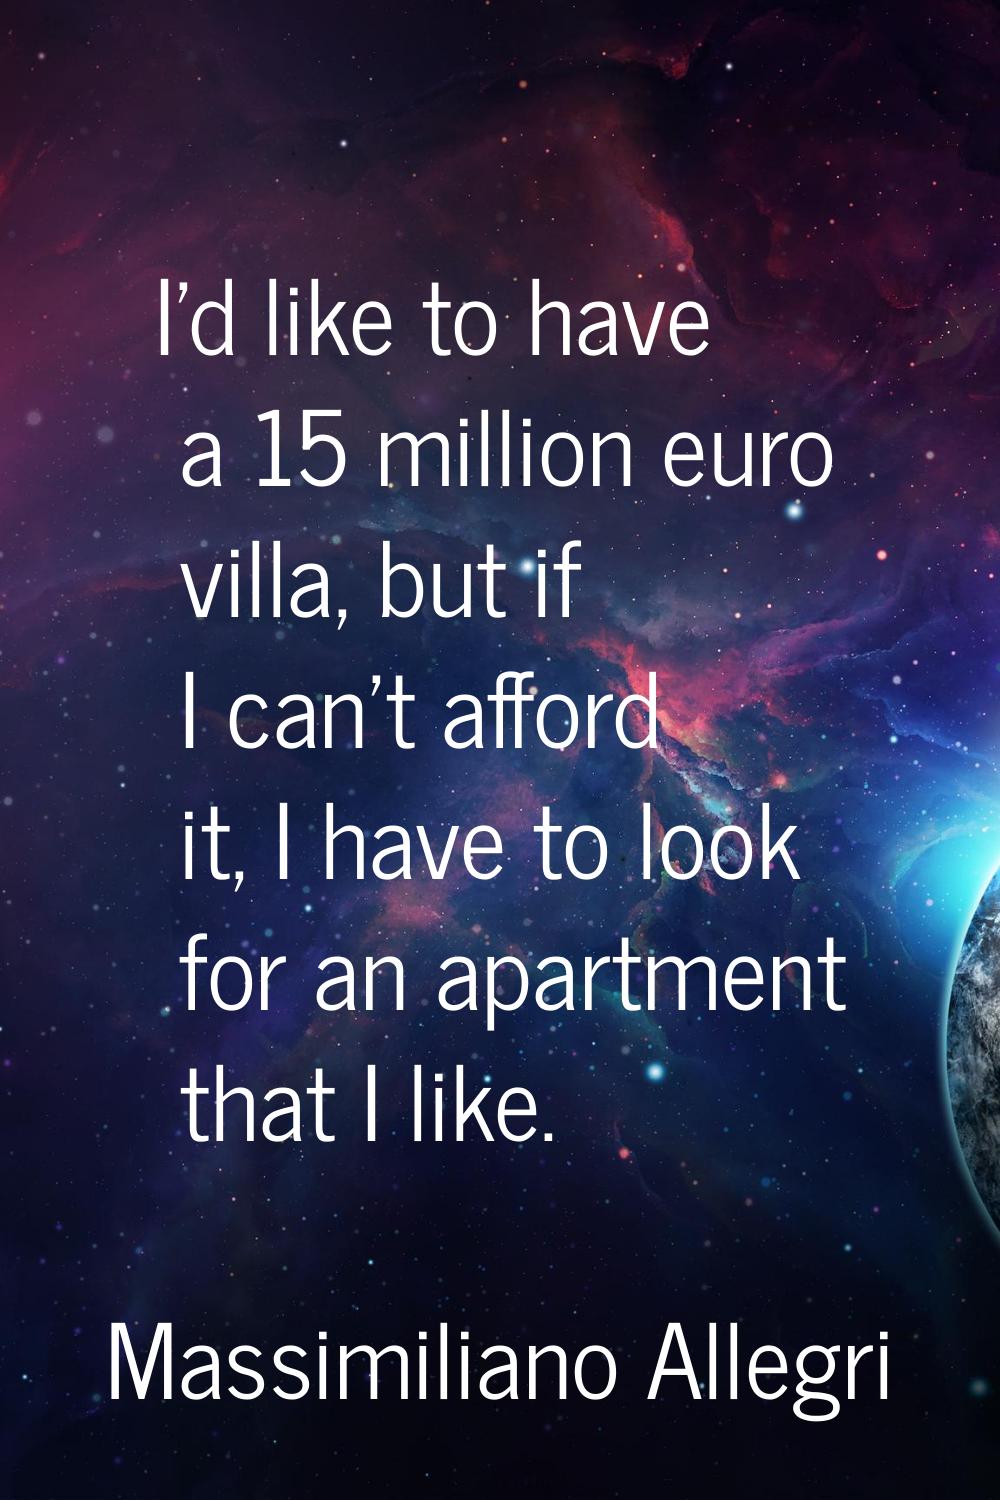 I'd like to have a 15 million euro villa, but if I can't afford it, I have to look for an apartment